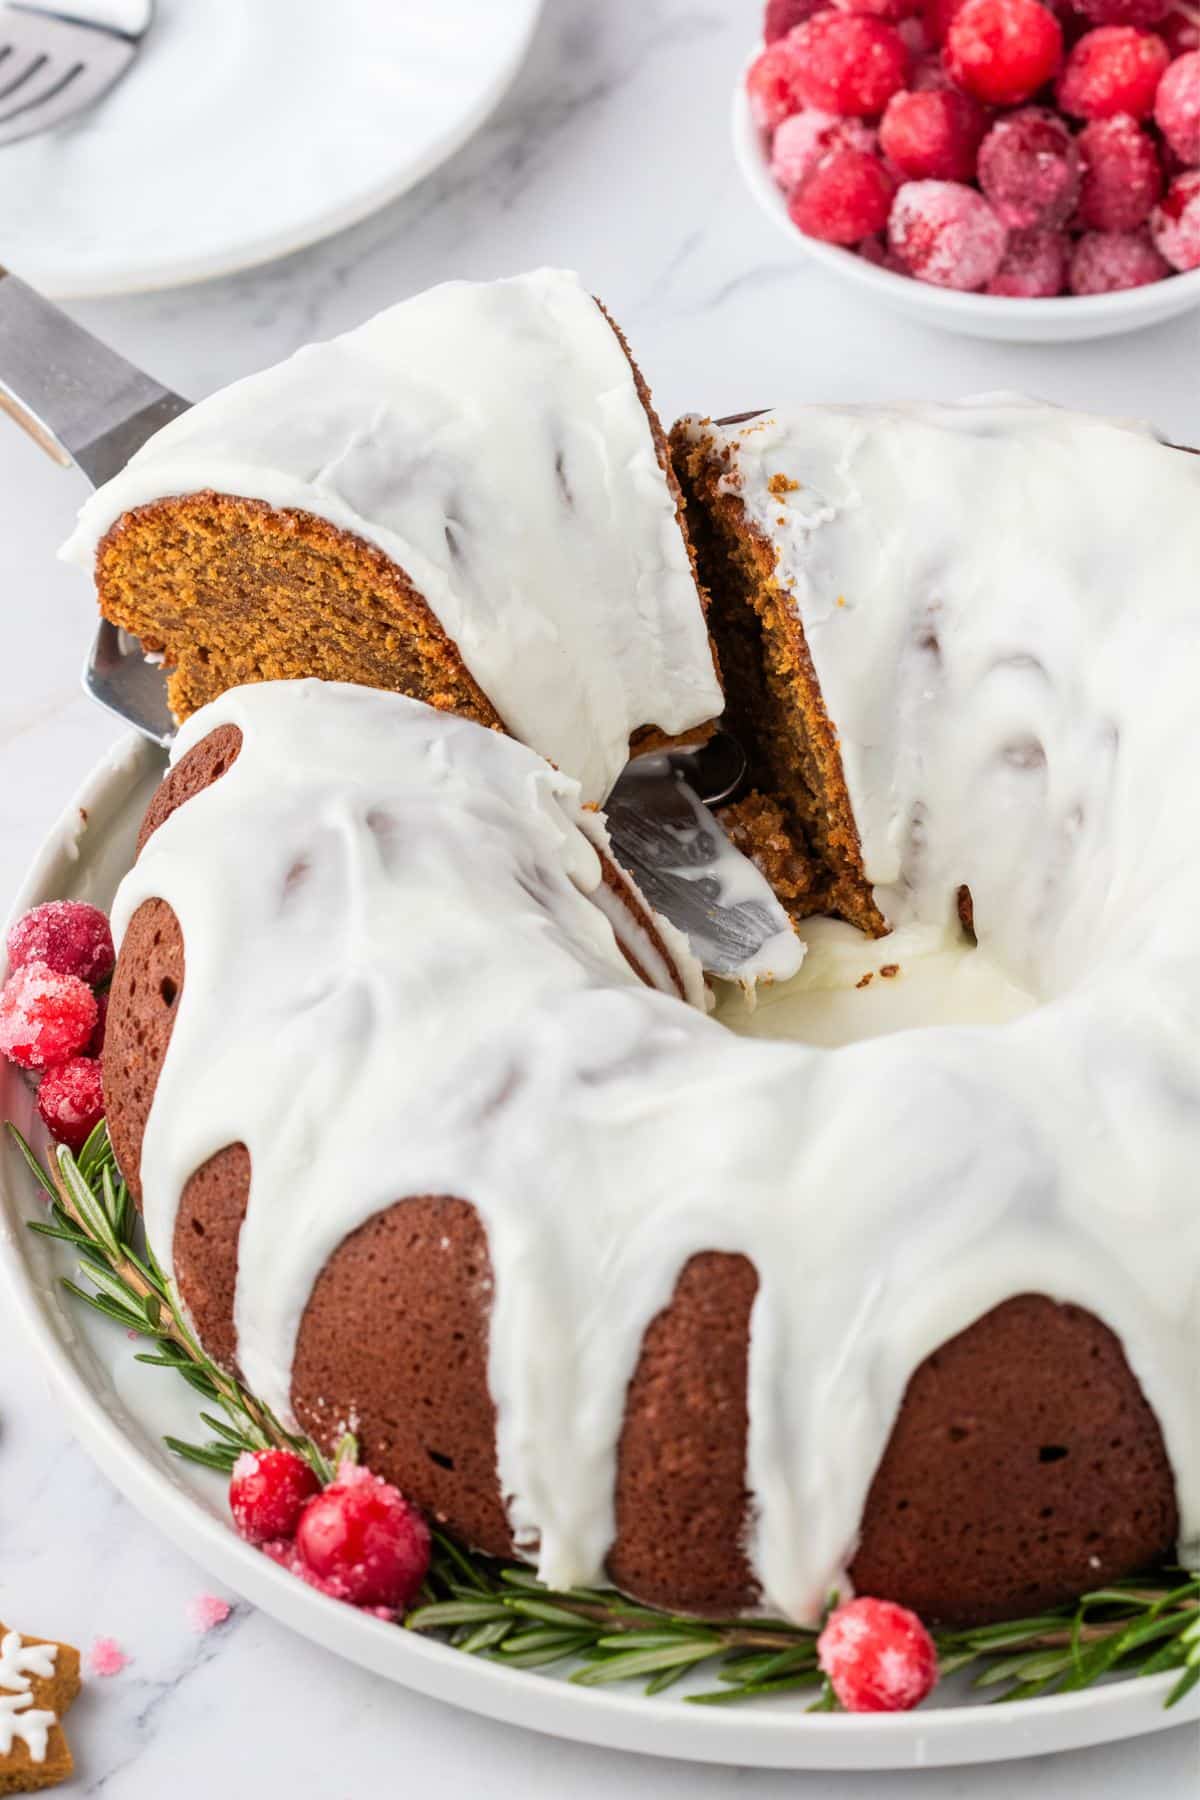 Pulling a slice of Gingerbread bundt cake from the whole cake.